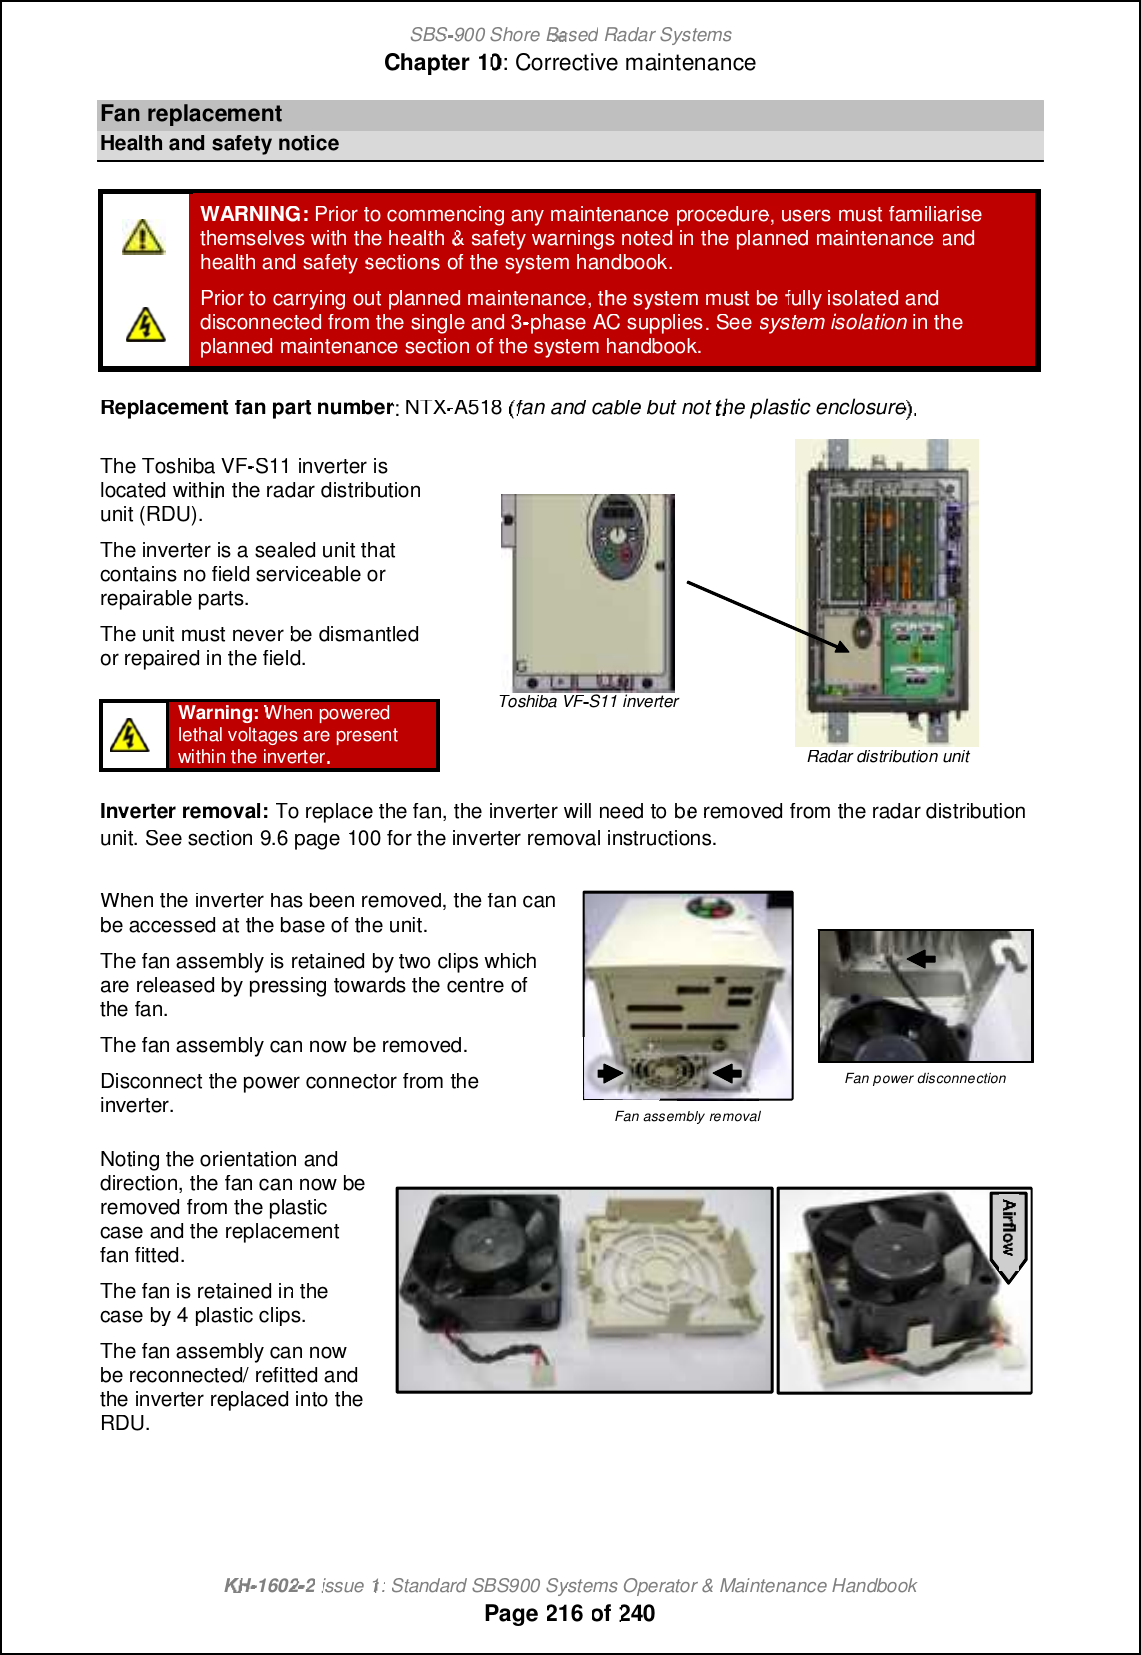 SBS-900 ShoreBaBasedRadar SystemsChapter1010:Corrective maintenanceKHKH-1602 2issue 1:Standard SBS900 Systems Operator &amp; Maintenance HandbookPage216of240FanreplacementHealth and safetynoticeWARNING:Prior to commencing any maintenanceprocedure, users must familiarisethemselves with the health&amp;safety warnings noted in the planned maintenanceandhealth and safetysectionsof the system handbook.Prior to carrying outplanned maintenance, the system must befully isolated anddisconnectedfrom the single and 3-phase AC supplies. Seesystem isolationin theplanned maintenance section of the system handbook.Replacement fan part number: NTX-A518 (fan and cable but not the plastic enclosure).The Toshiba VF-S11 inverter islocated within the radar distributionunit (RDU).The inverter is a sealed unit thatcontains no field serviceable orrepairable parts.The unit must never be dismantledor repaired in the field.Toshiba VFS11 inverterRadar distribution unitWarning:When poweredlethal voltages are presentwithin the inverter.Inverter removal:To replace the fan, the inverter will need tobe removed from the radar distributionunit.See section9.6page100for the inverter removal instructions.When the inverter has been removed, the fan canbe accessed at the base of the unit.The fan assembly is retained by two clips whichare released by pressing towards the centre ofthe fan.The fan assembly can now be removed.Disconnect the power connector from theinverter.Fan assembly removalFan power disconnectionNoting the orientation anddirection, the fan can now beremoved fromthe plasticcase and the replacementfan fitted.The fan is retained in thecase by 4 plastic clips.The fan assembly can nowbe reconnected/ refitted andthe inverter replaced into theRDU.